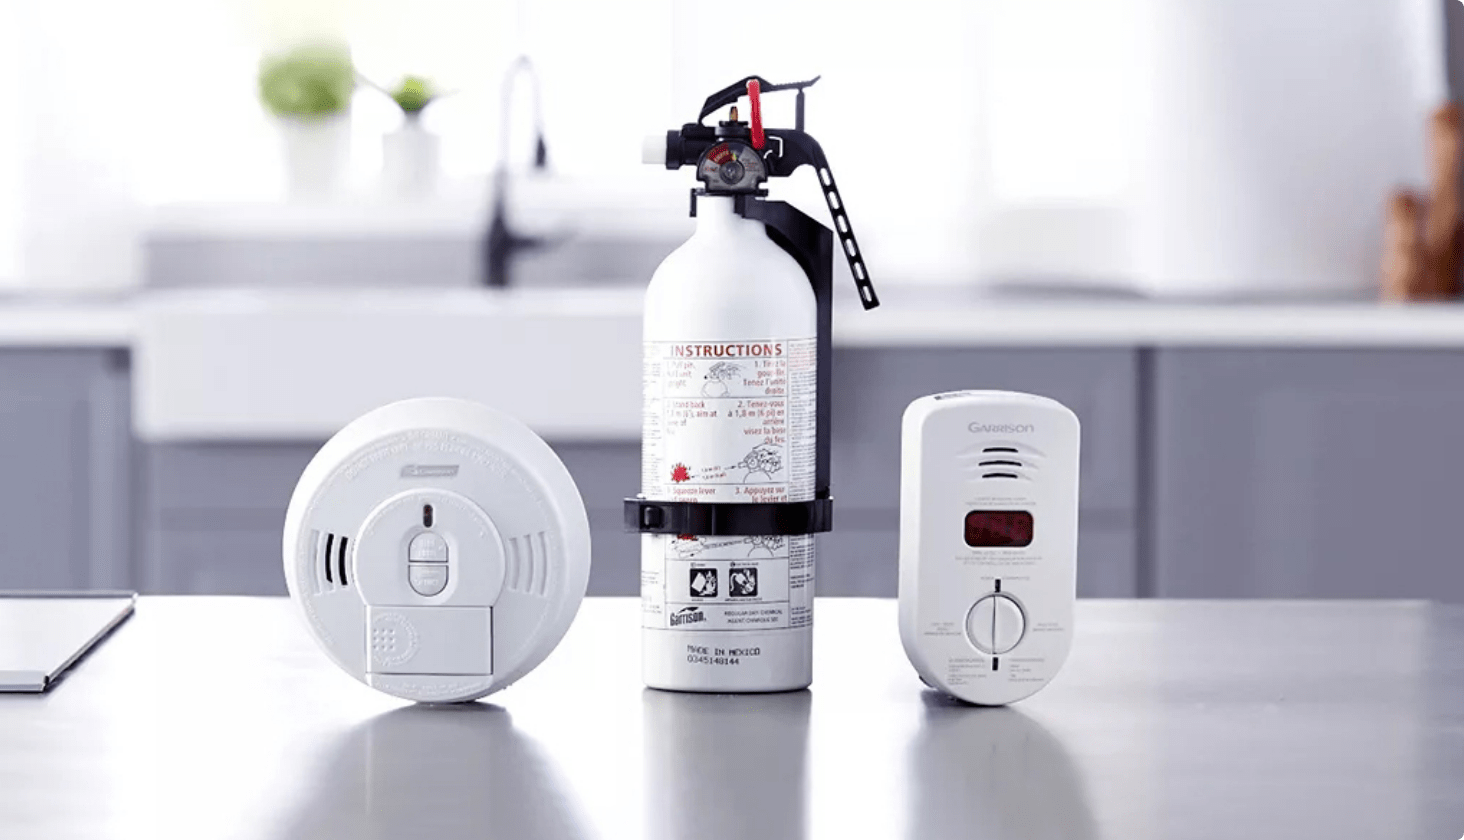 A white smoke detector, fire extinguisher, and carbon monoxide detector rest on a grey countertop inside a home.